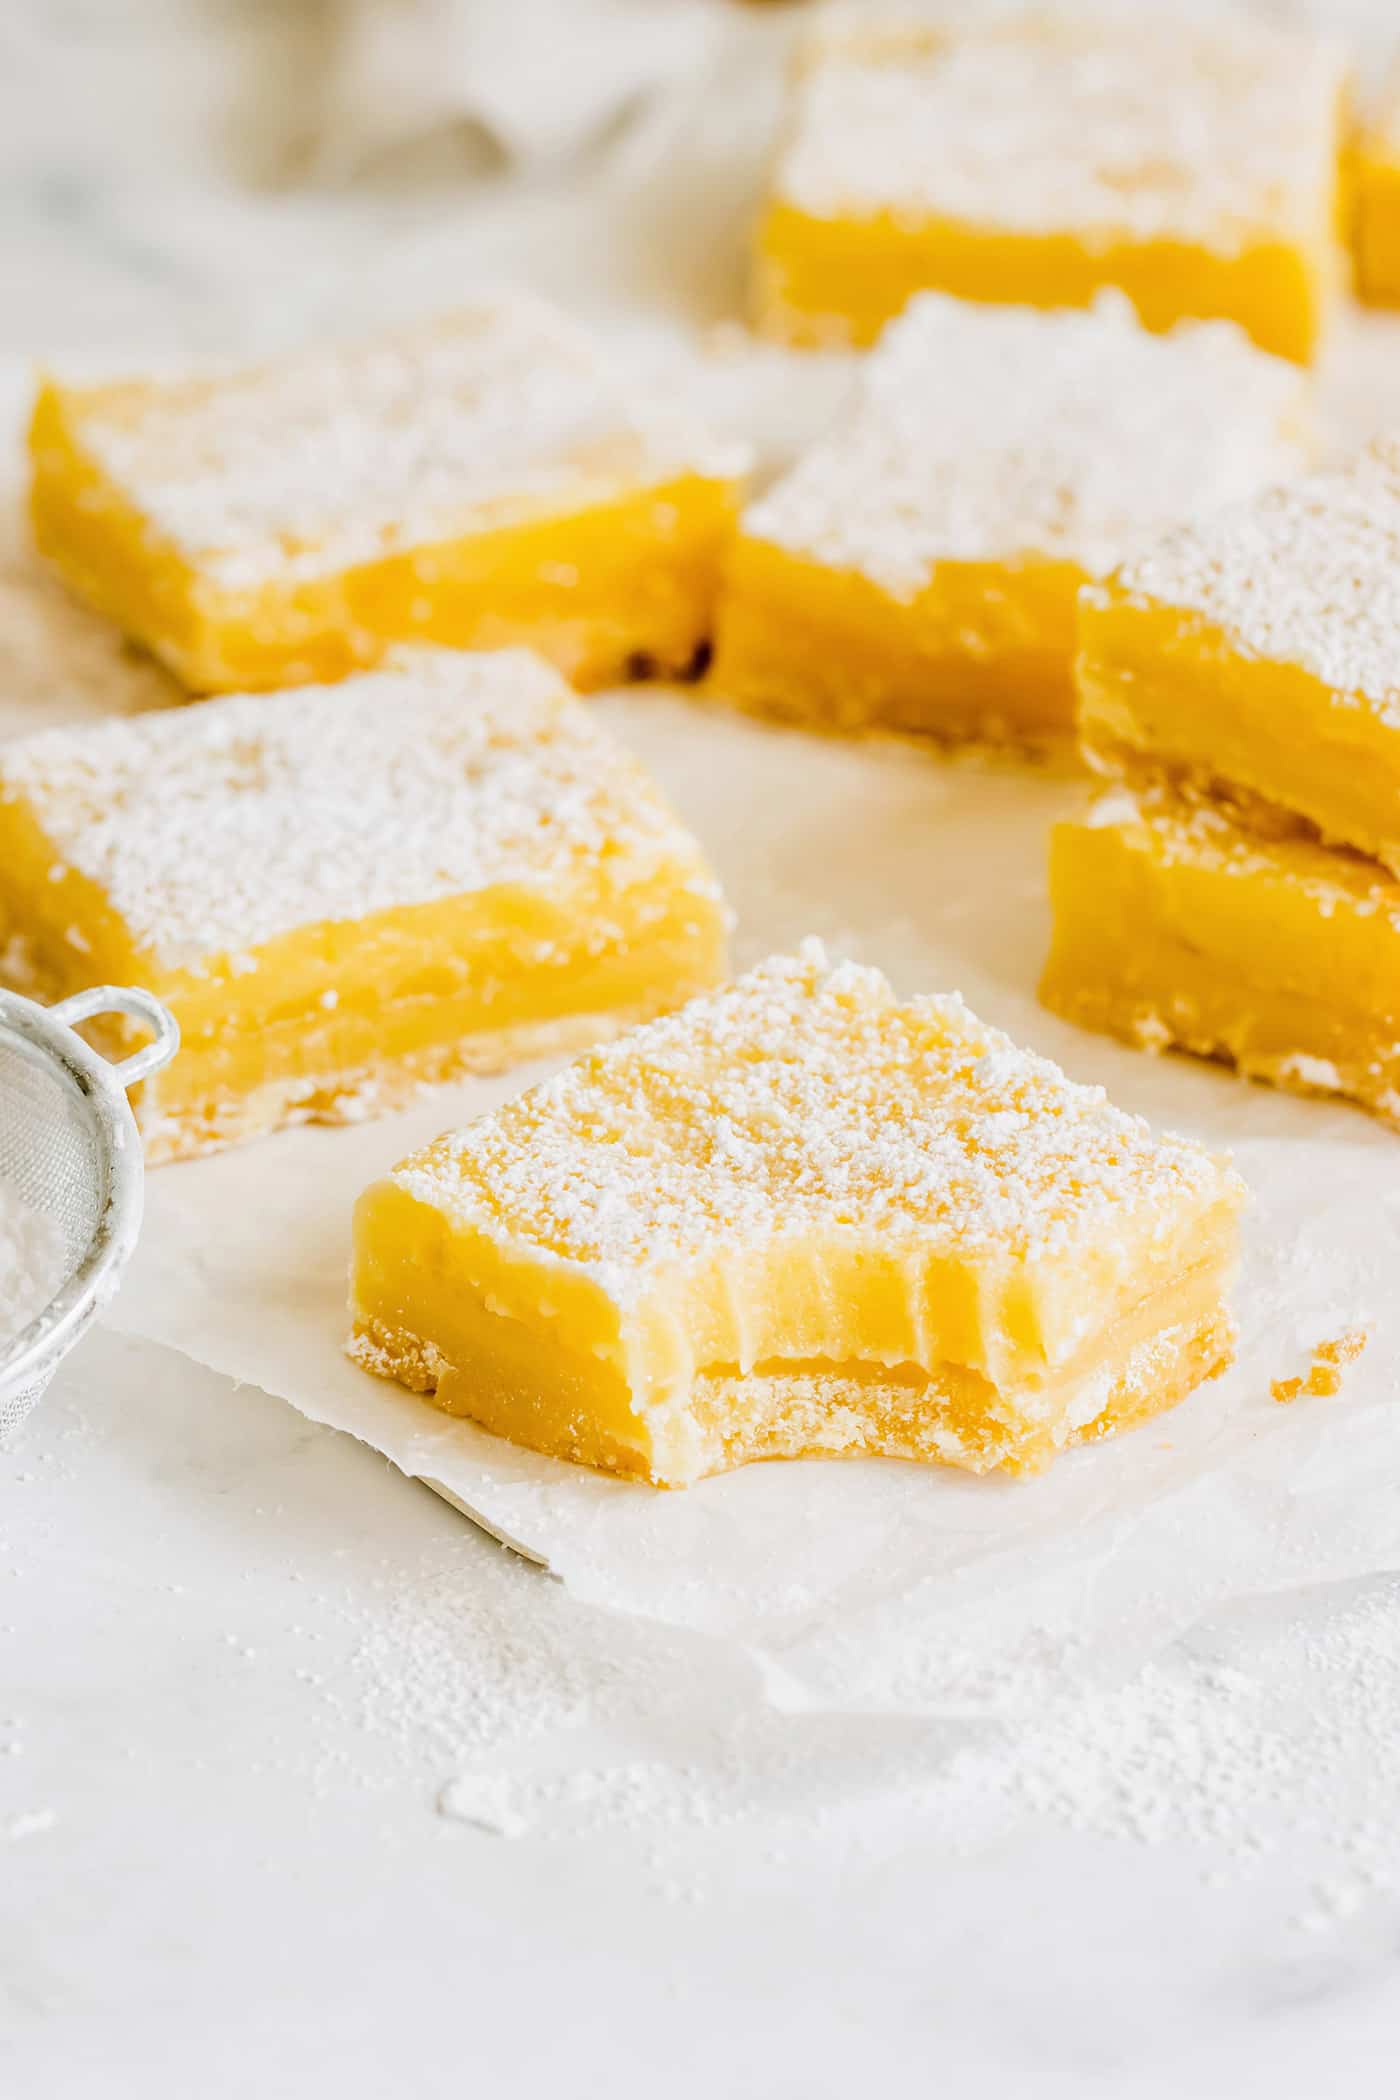 a bite out of a lemon bar, plus more lemon bars in the background